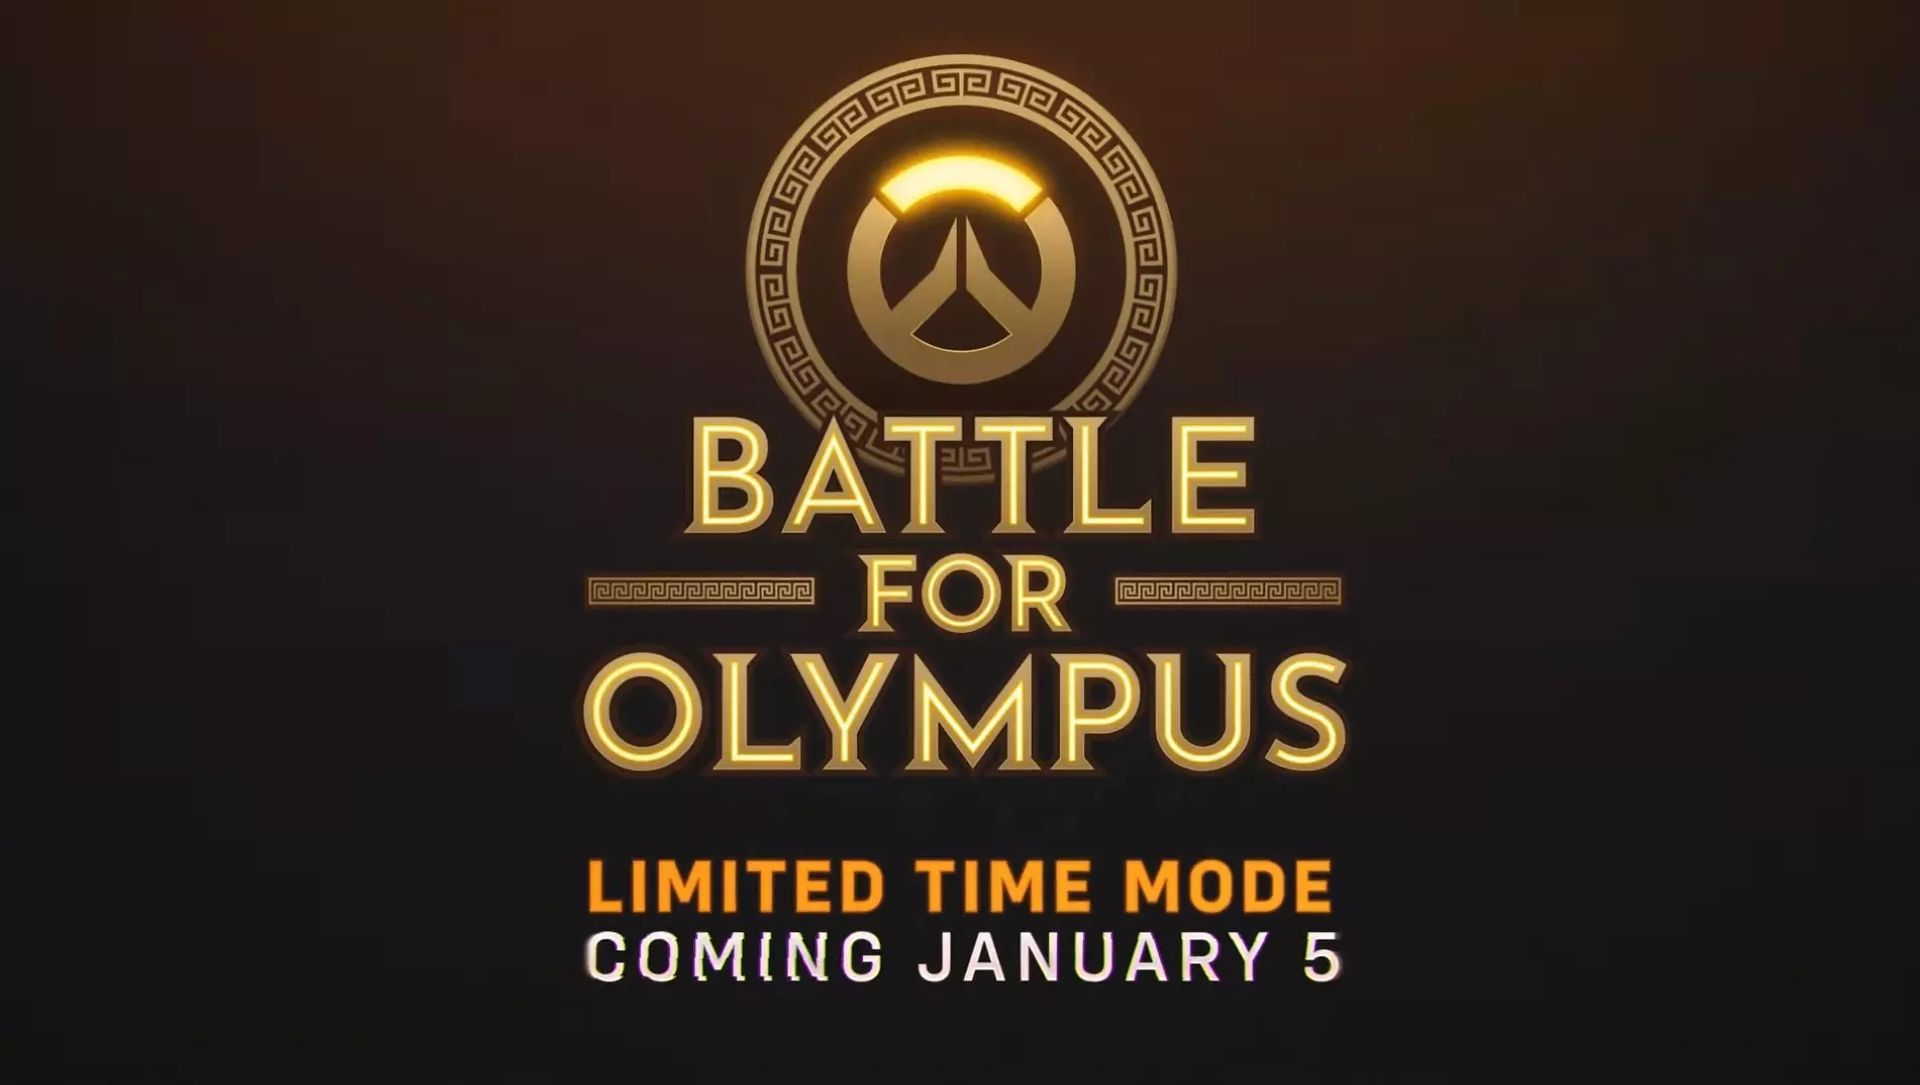 Battle for Olympus Overwatch 2 event explained